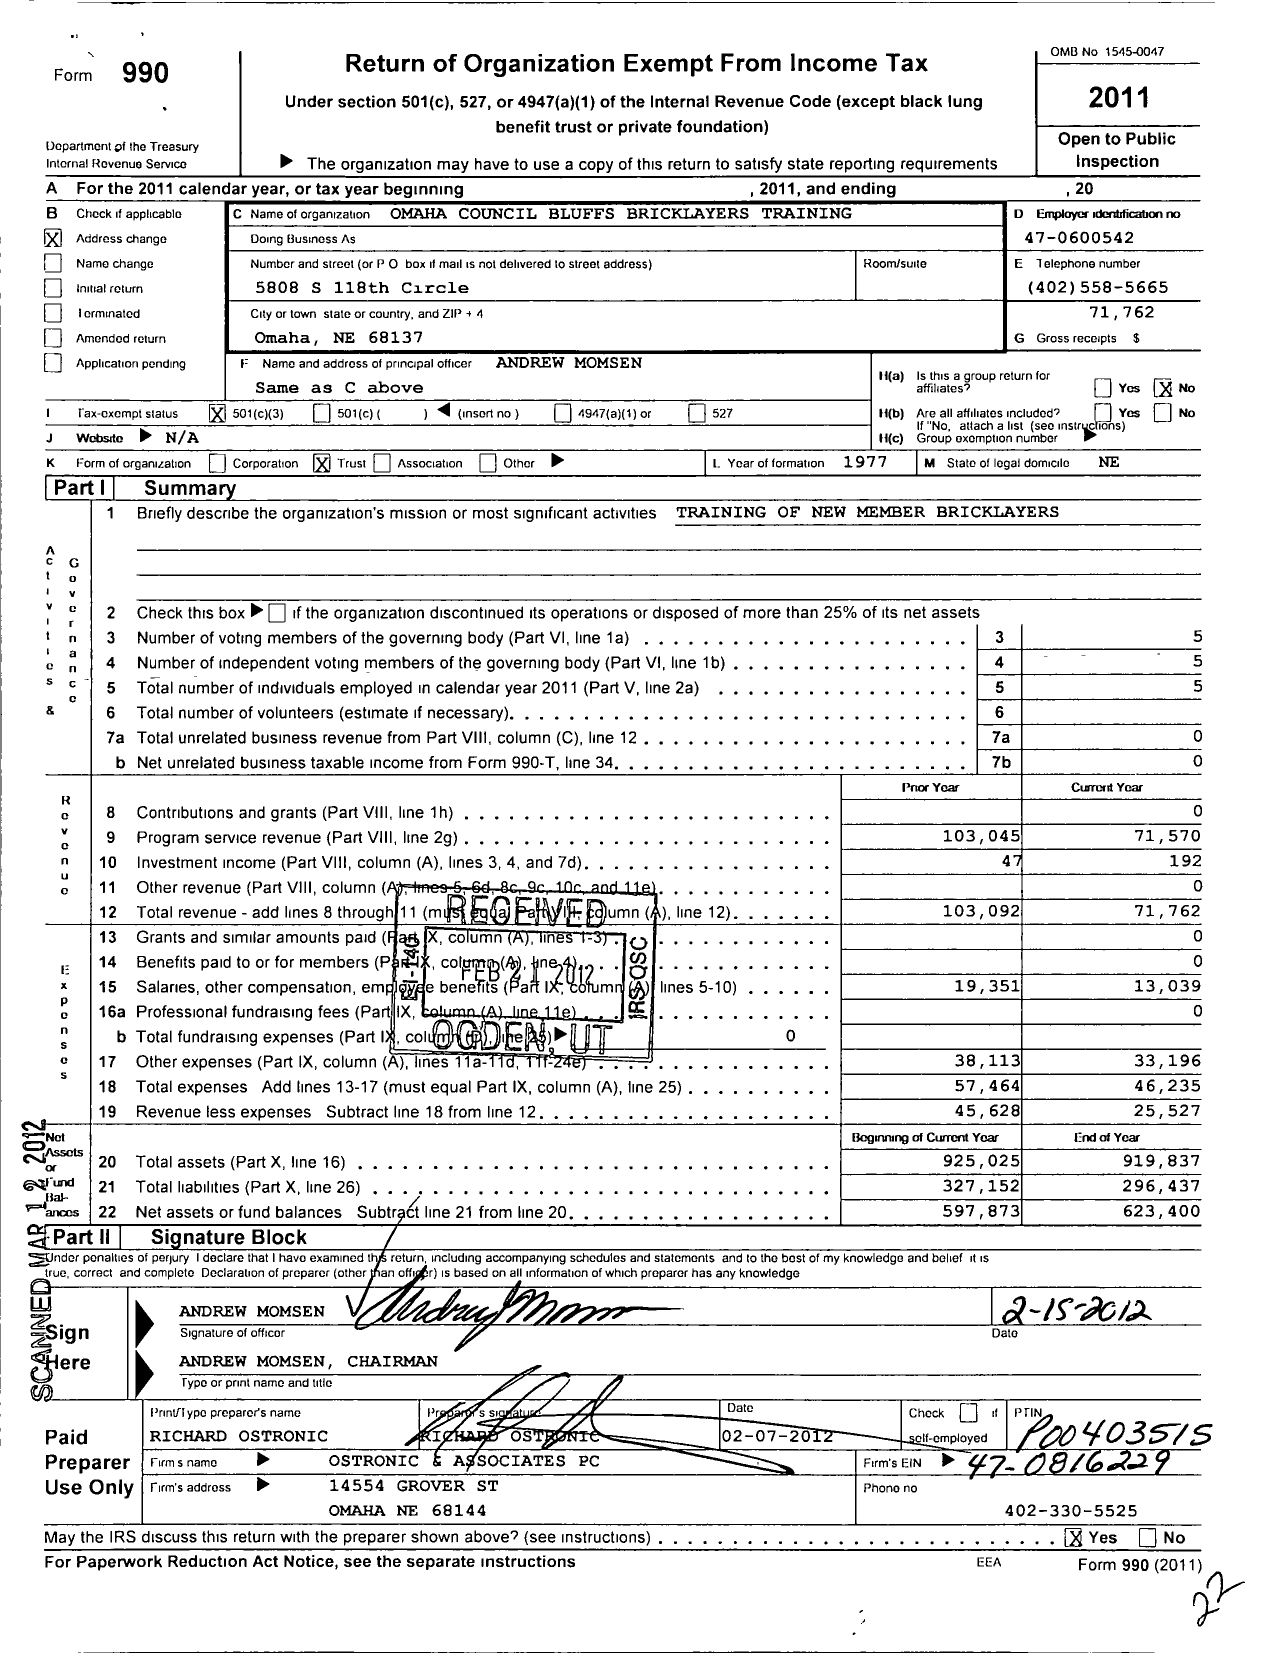 Image of first page of 2011 Form 990 for Omaha-Council Bluffs Bricklayers Training and Education Fund